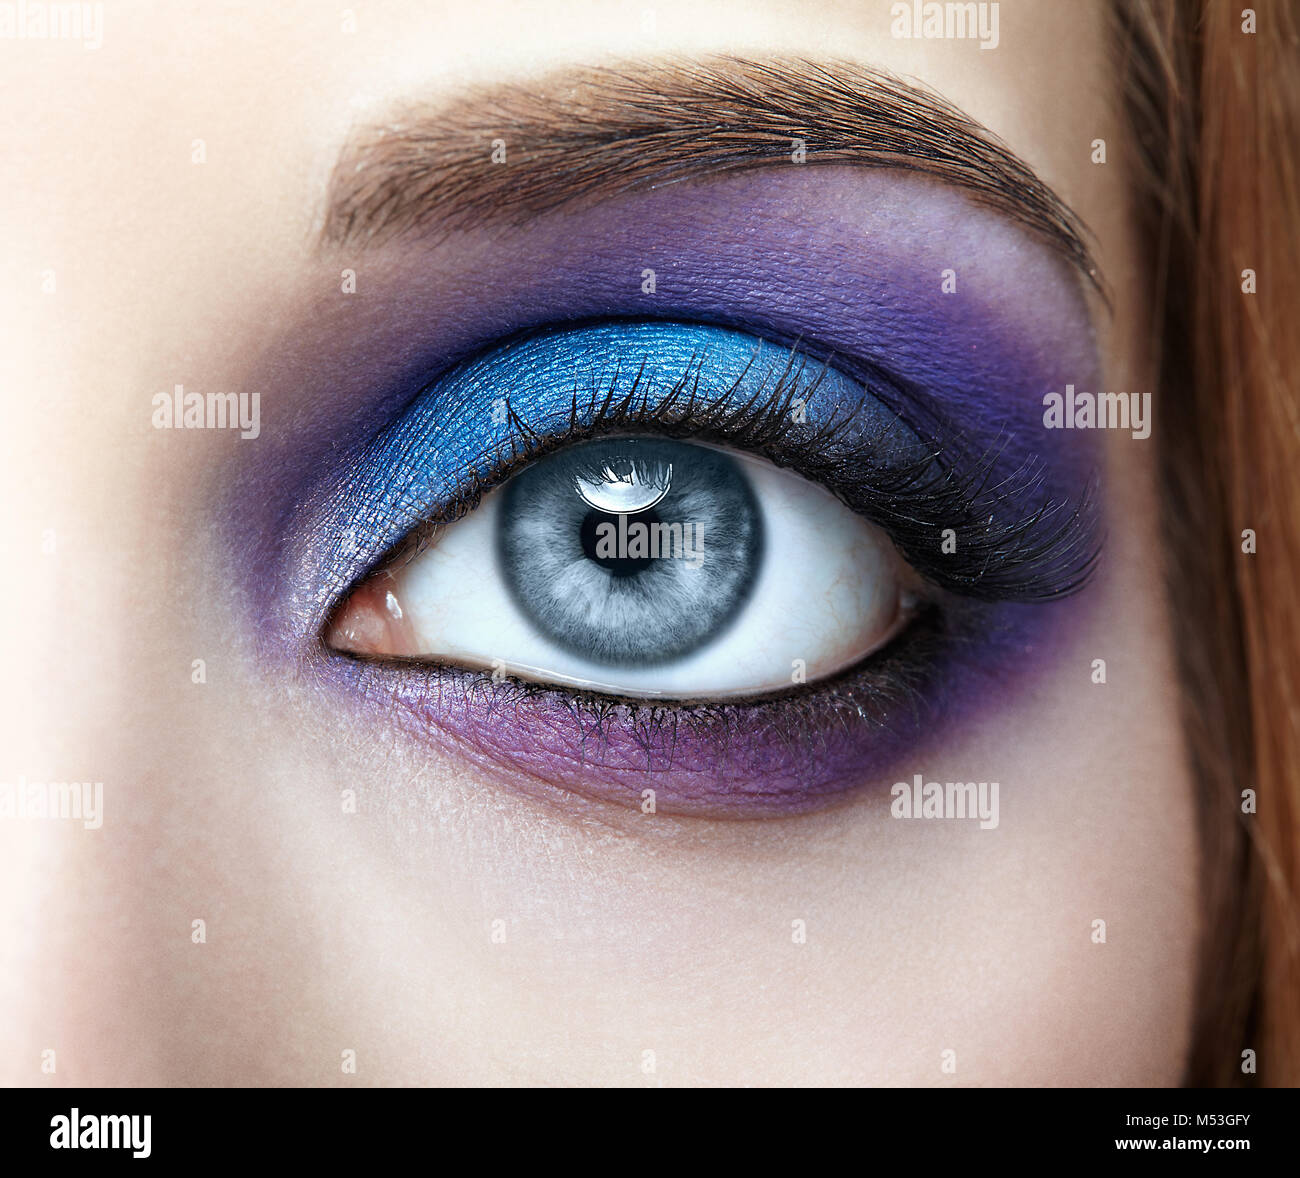 Closeup of female eye with blue and violet makeup Stock Photo